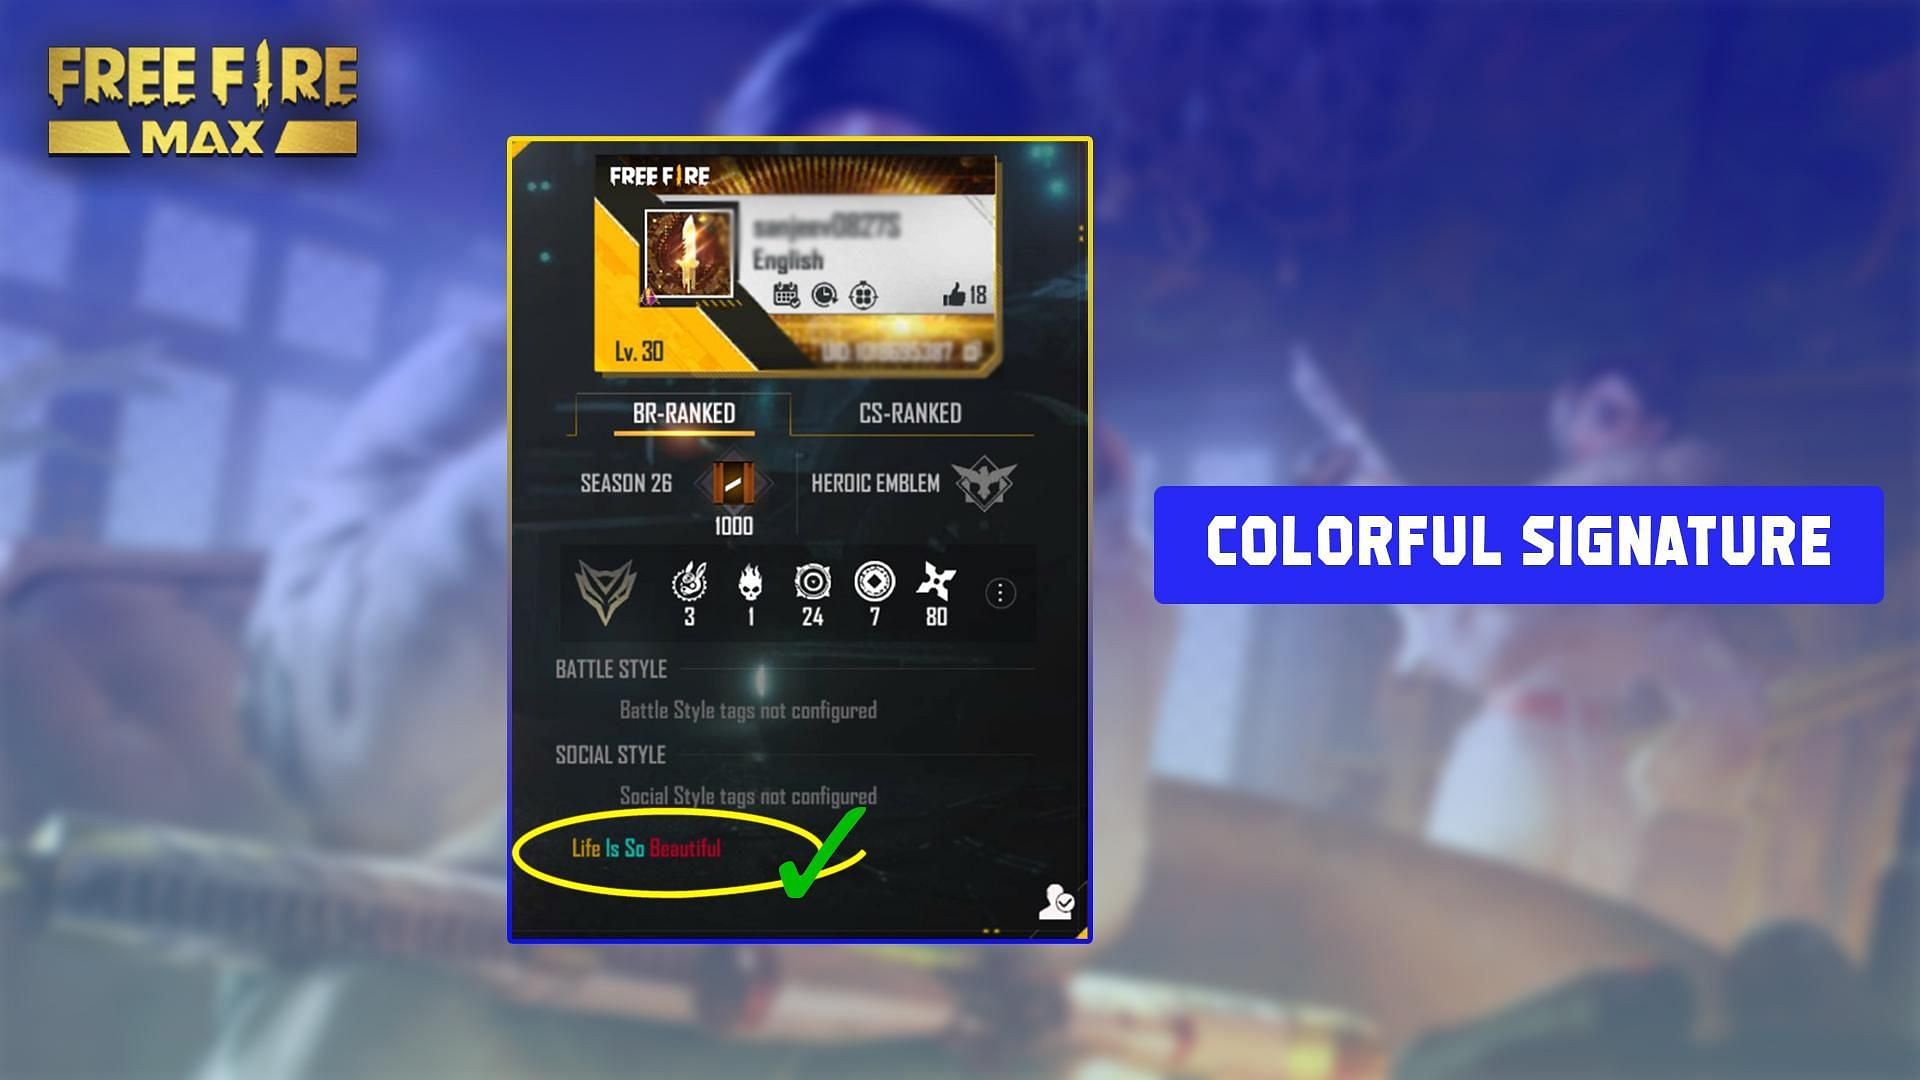 The colorful signature is a new trend in Free Fire MAX (Image via Sportskeeda)